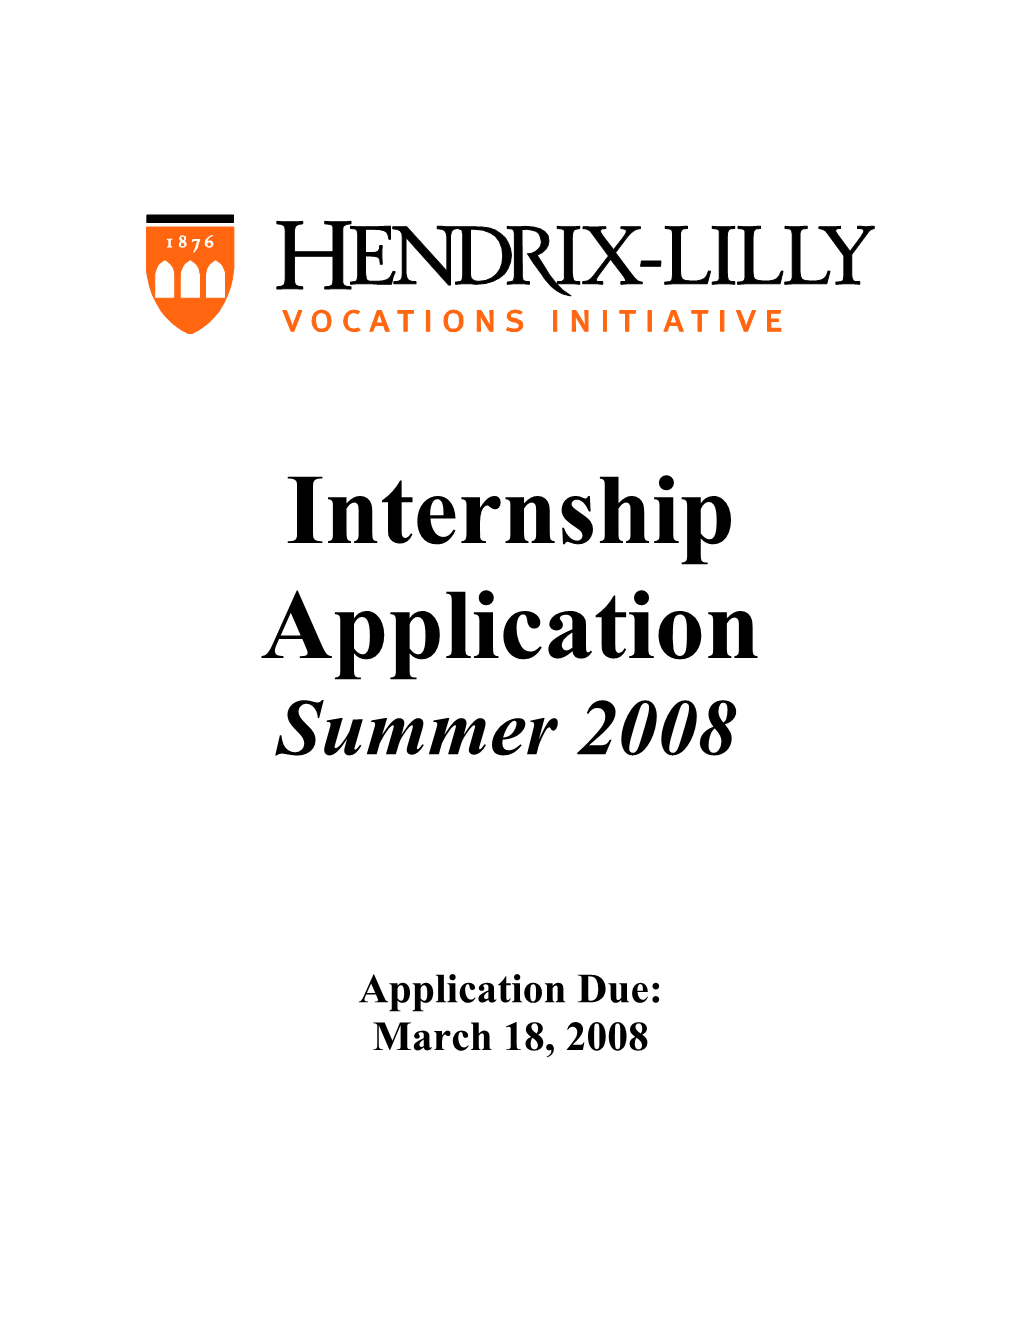 What Is a Hendrix - Lilly Internship?